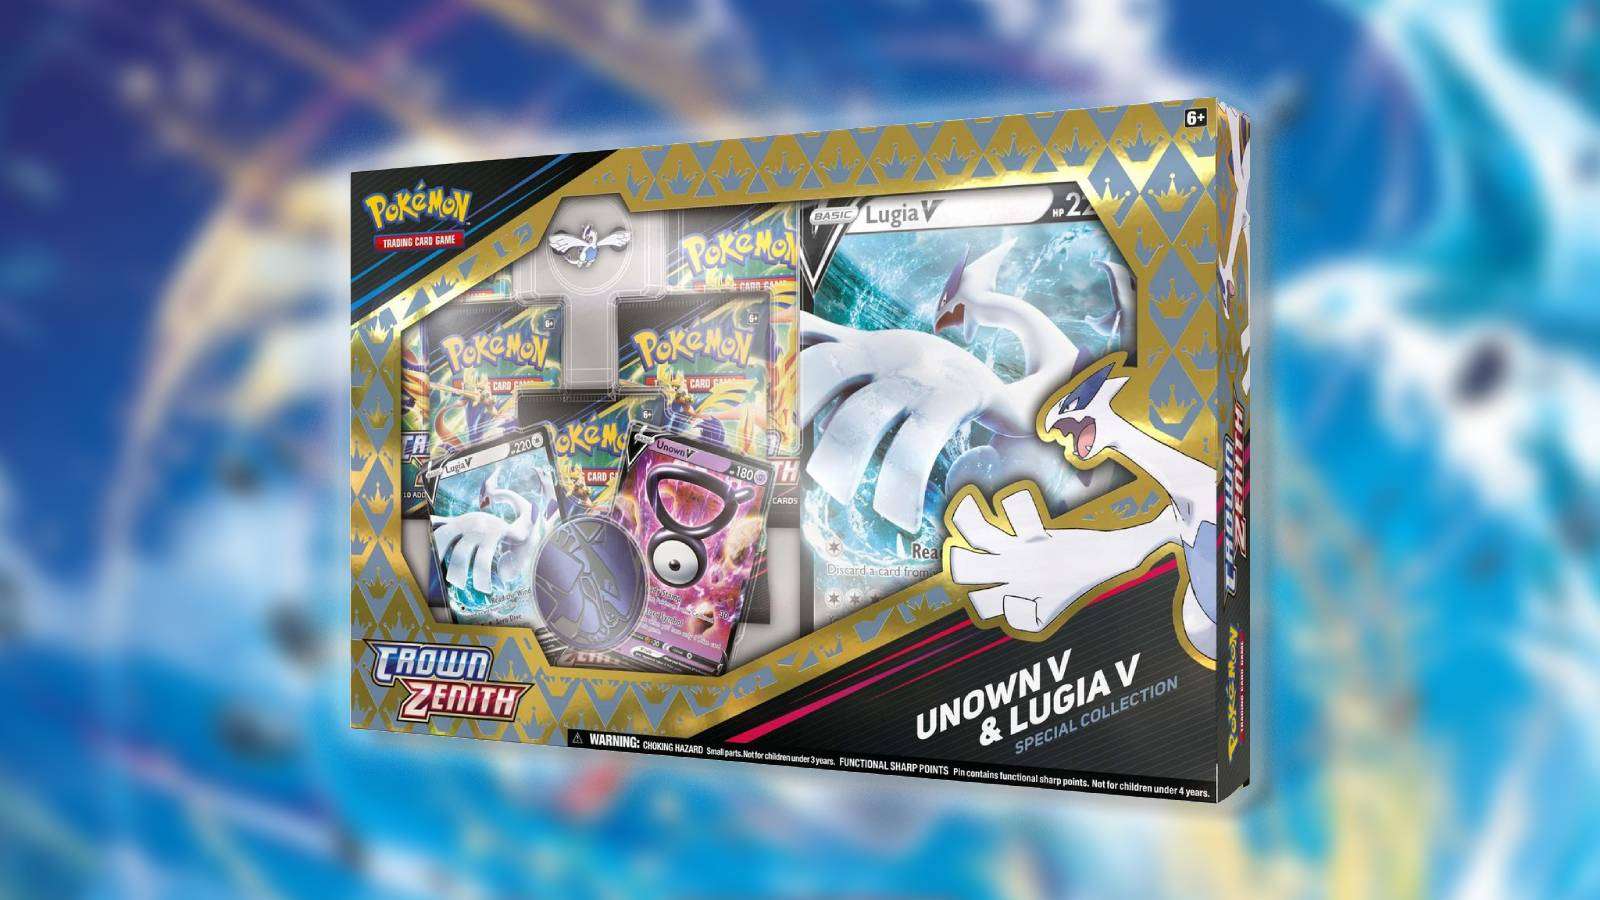 The Pokemon TCG Crown Zenith Lugia V set is shown against a blurred background